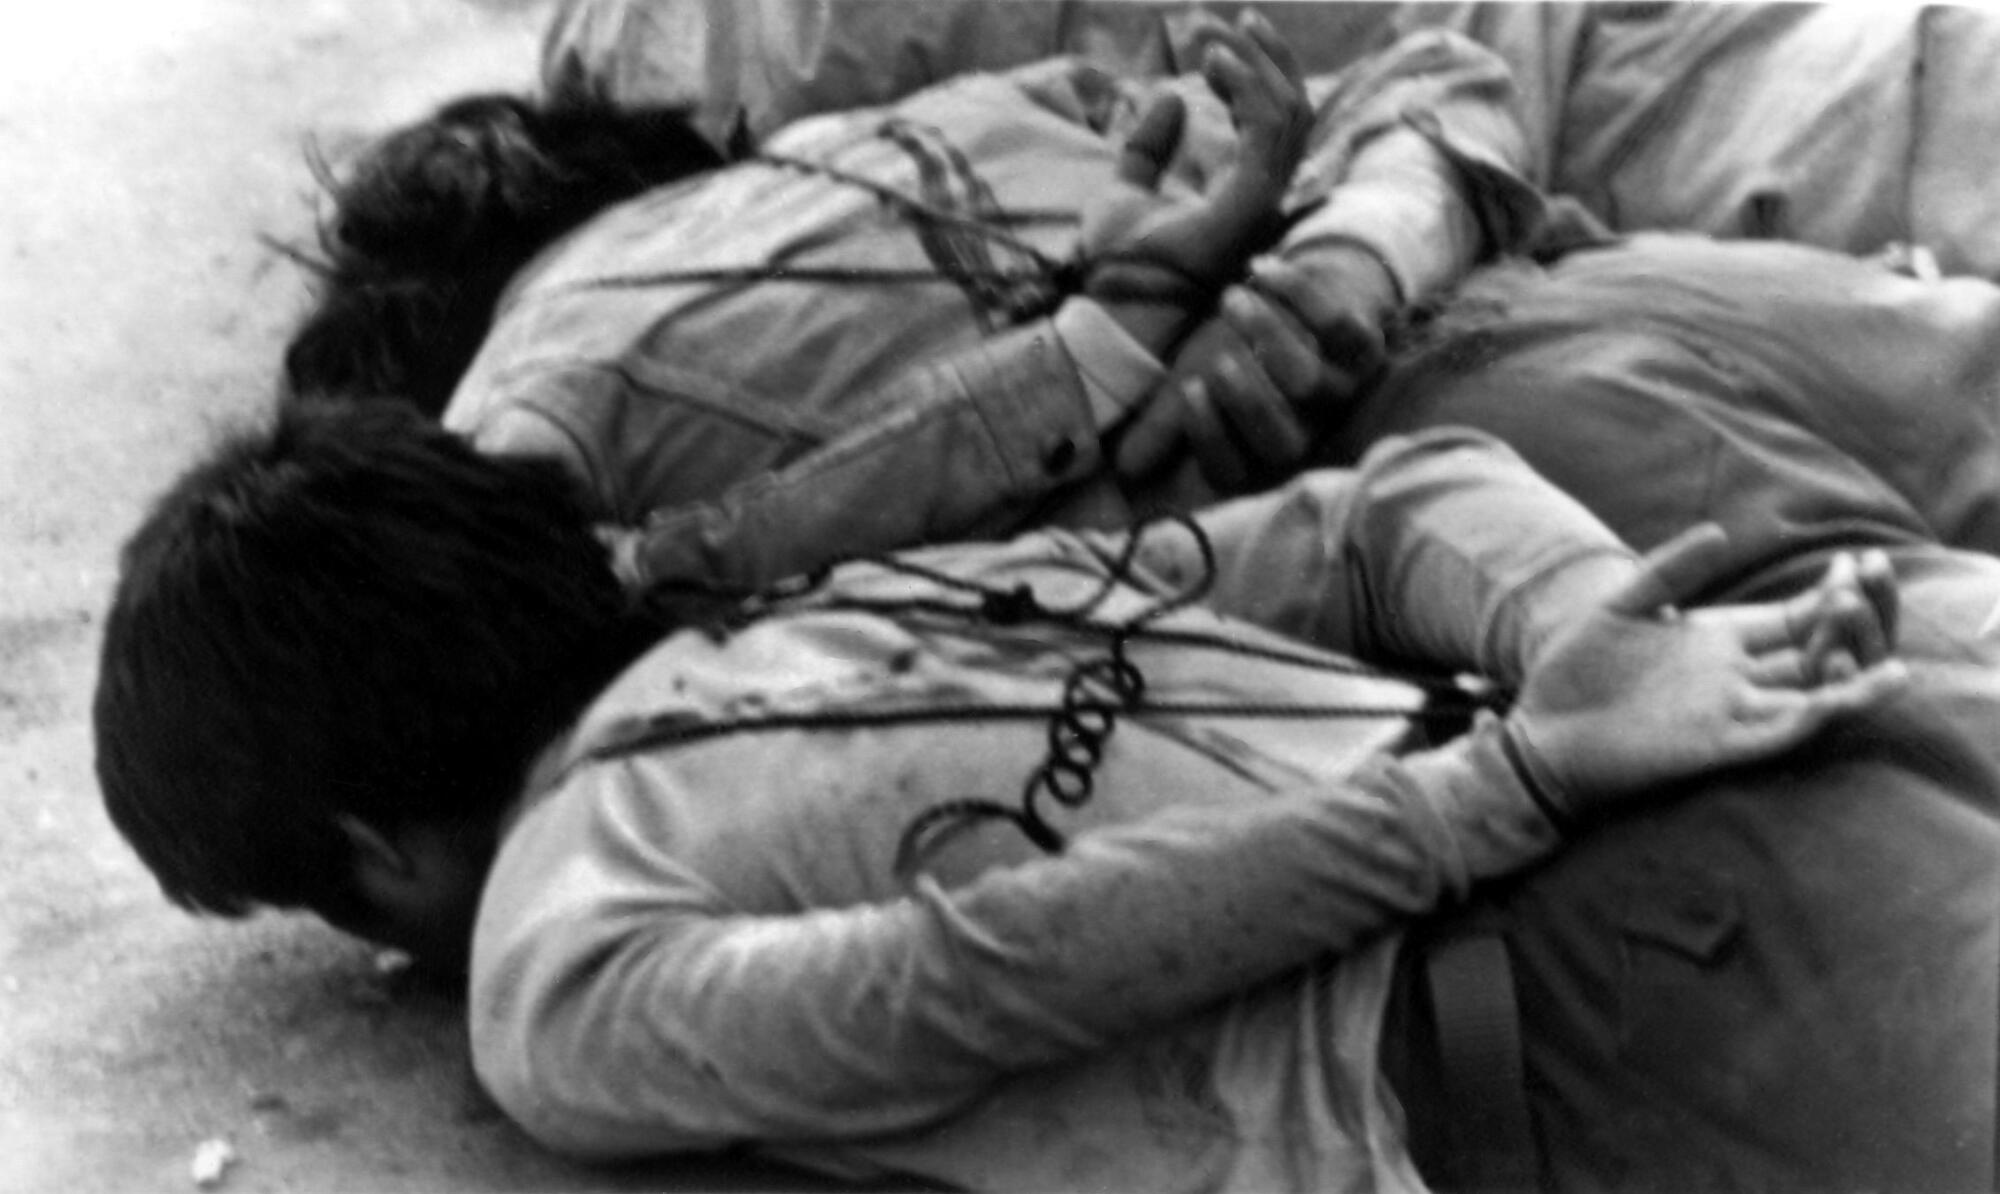 Two people lie facedown with their arms tied behind their backs